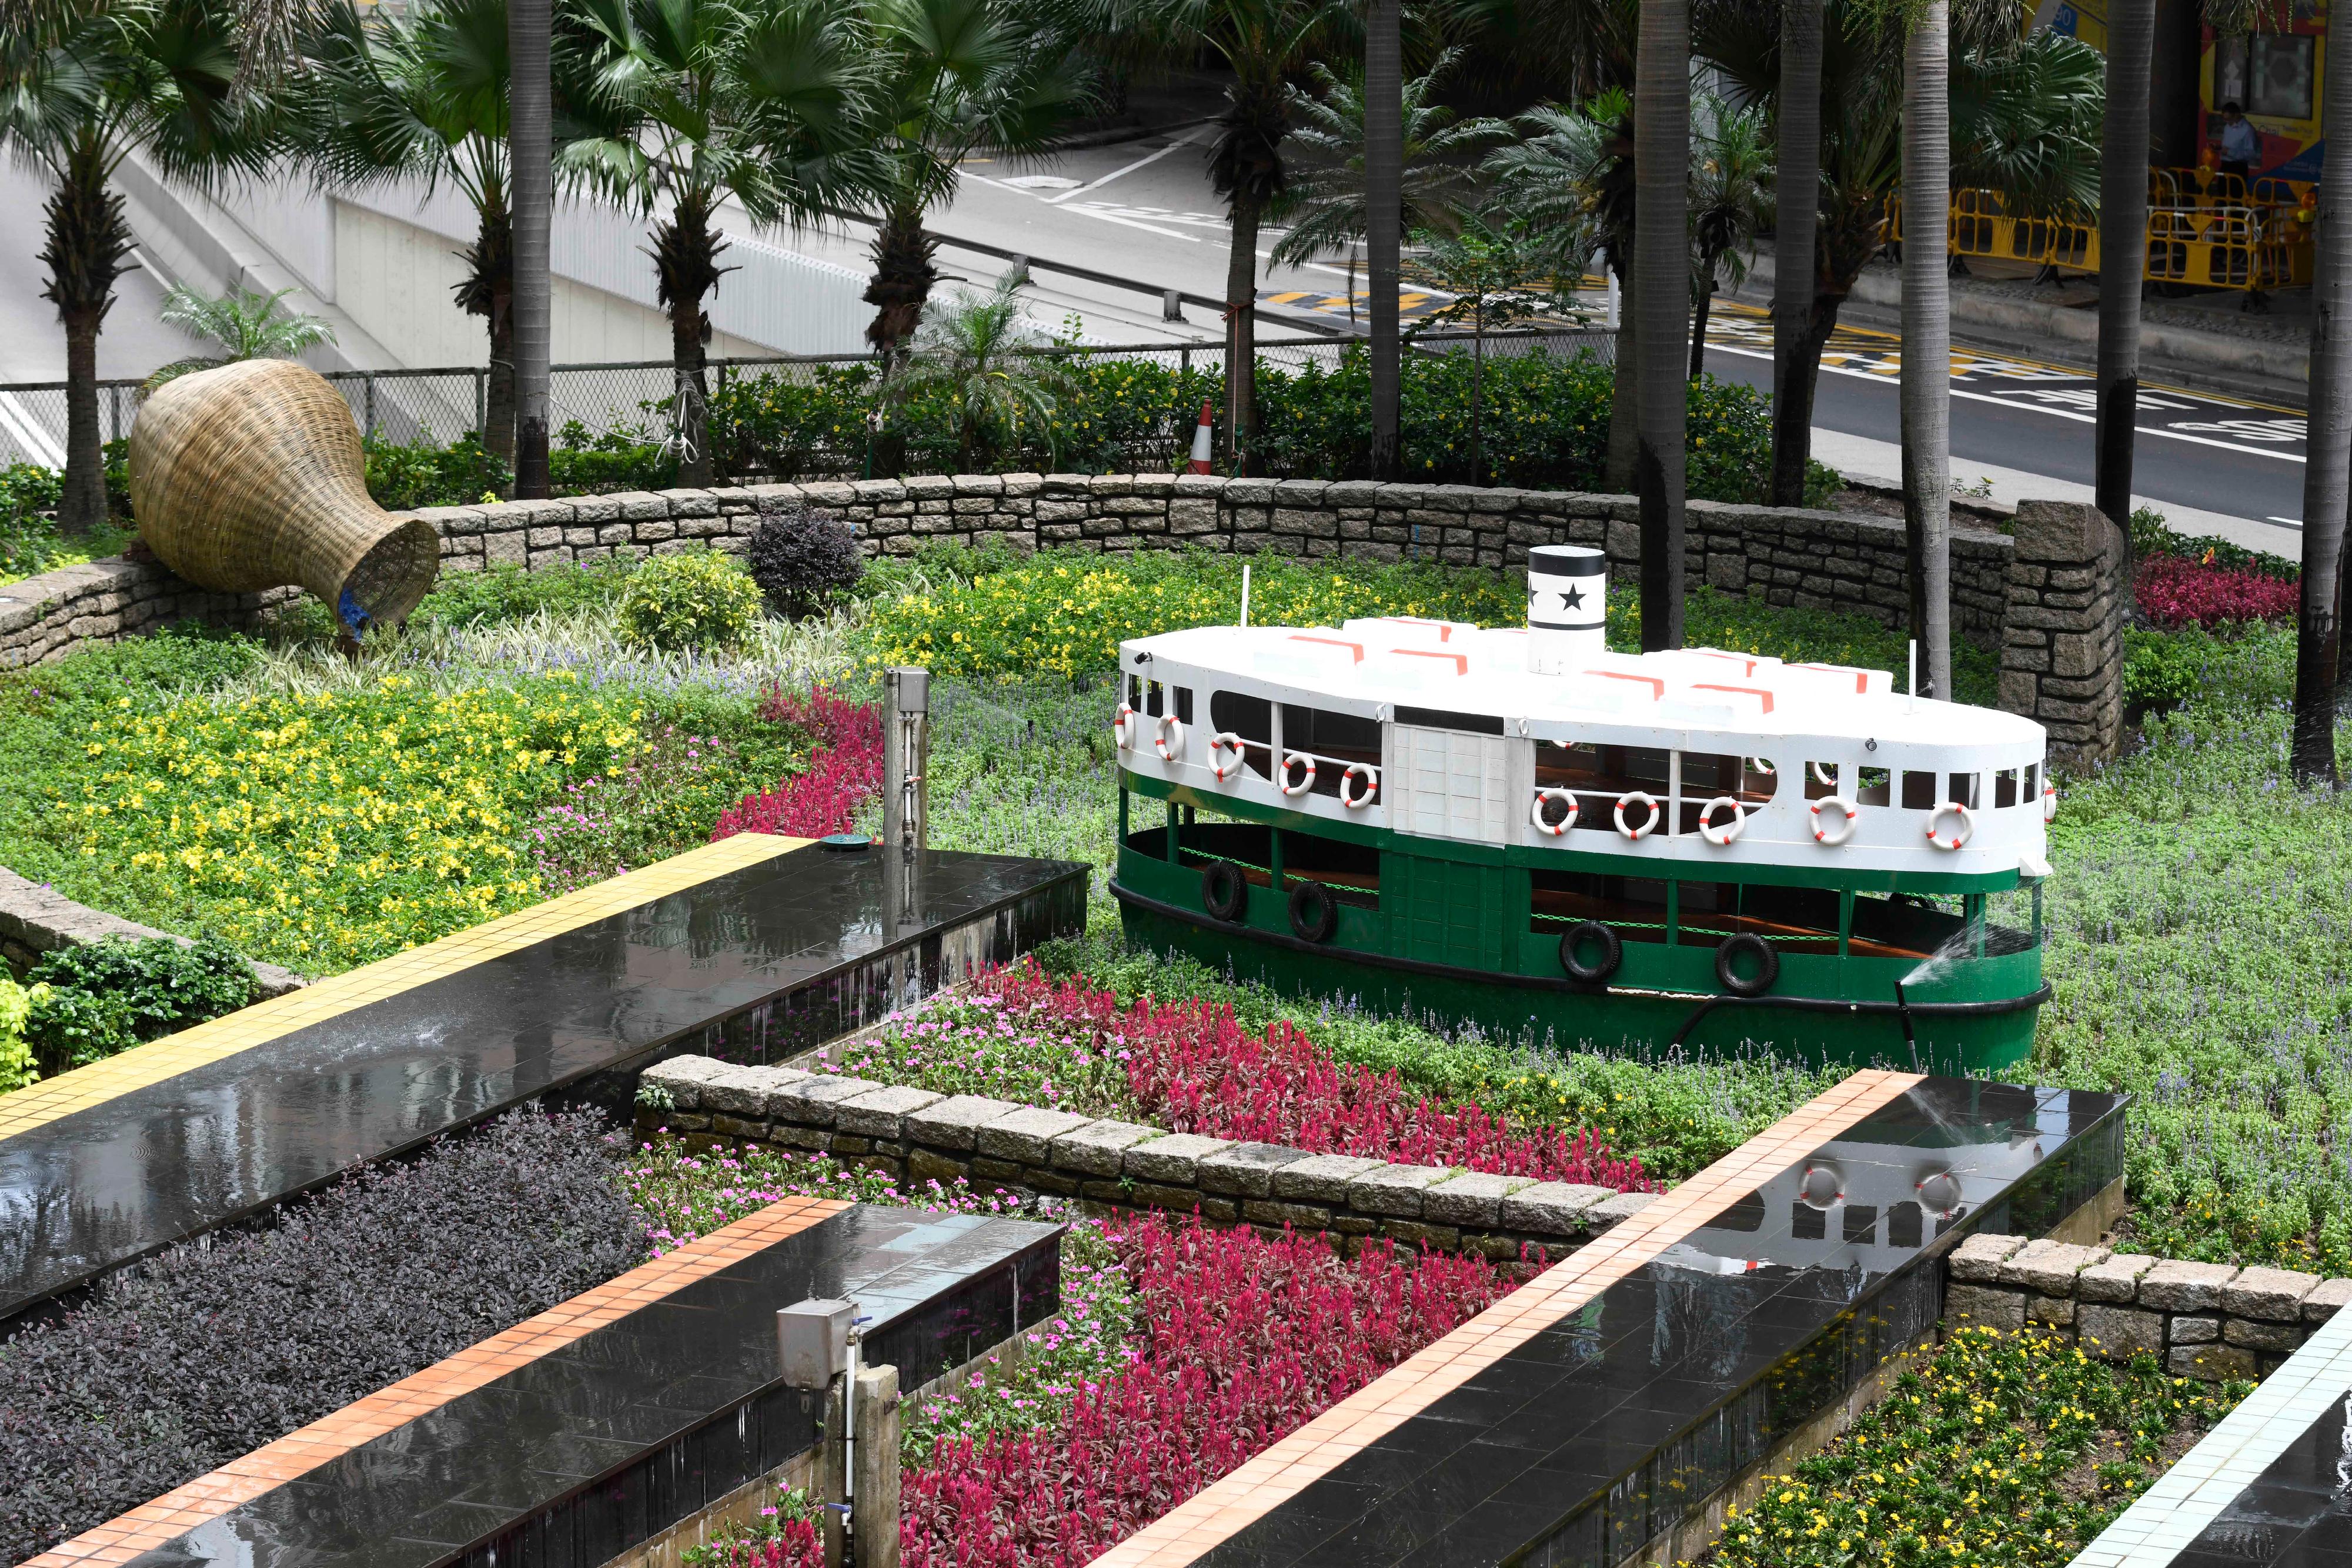 The Leisure and Cultural Services Department will run the Blossom Around Town programme in phases from June to October. Photo shows the themed amenity area "Floral Celebration in the Harbourfront" at the roundabout on Pedder Street.